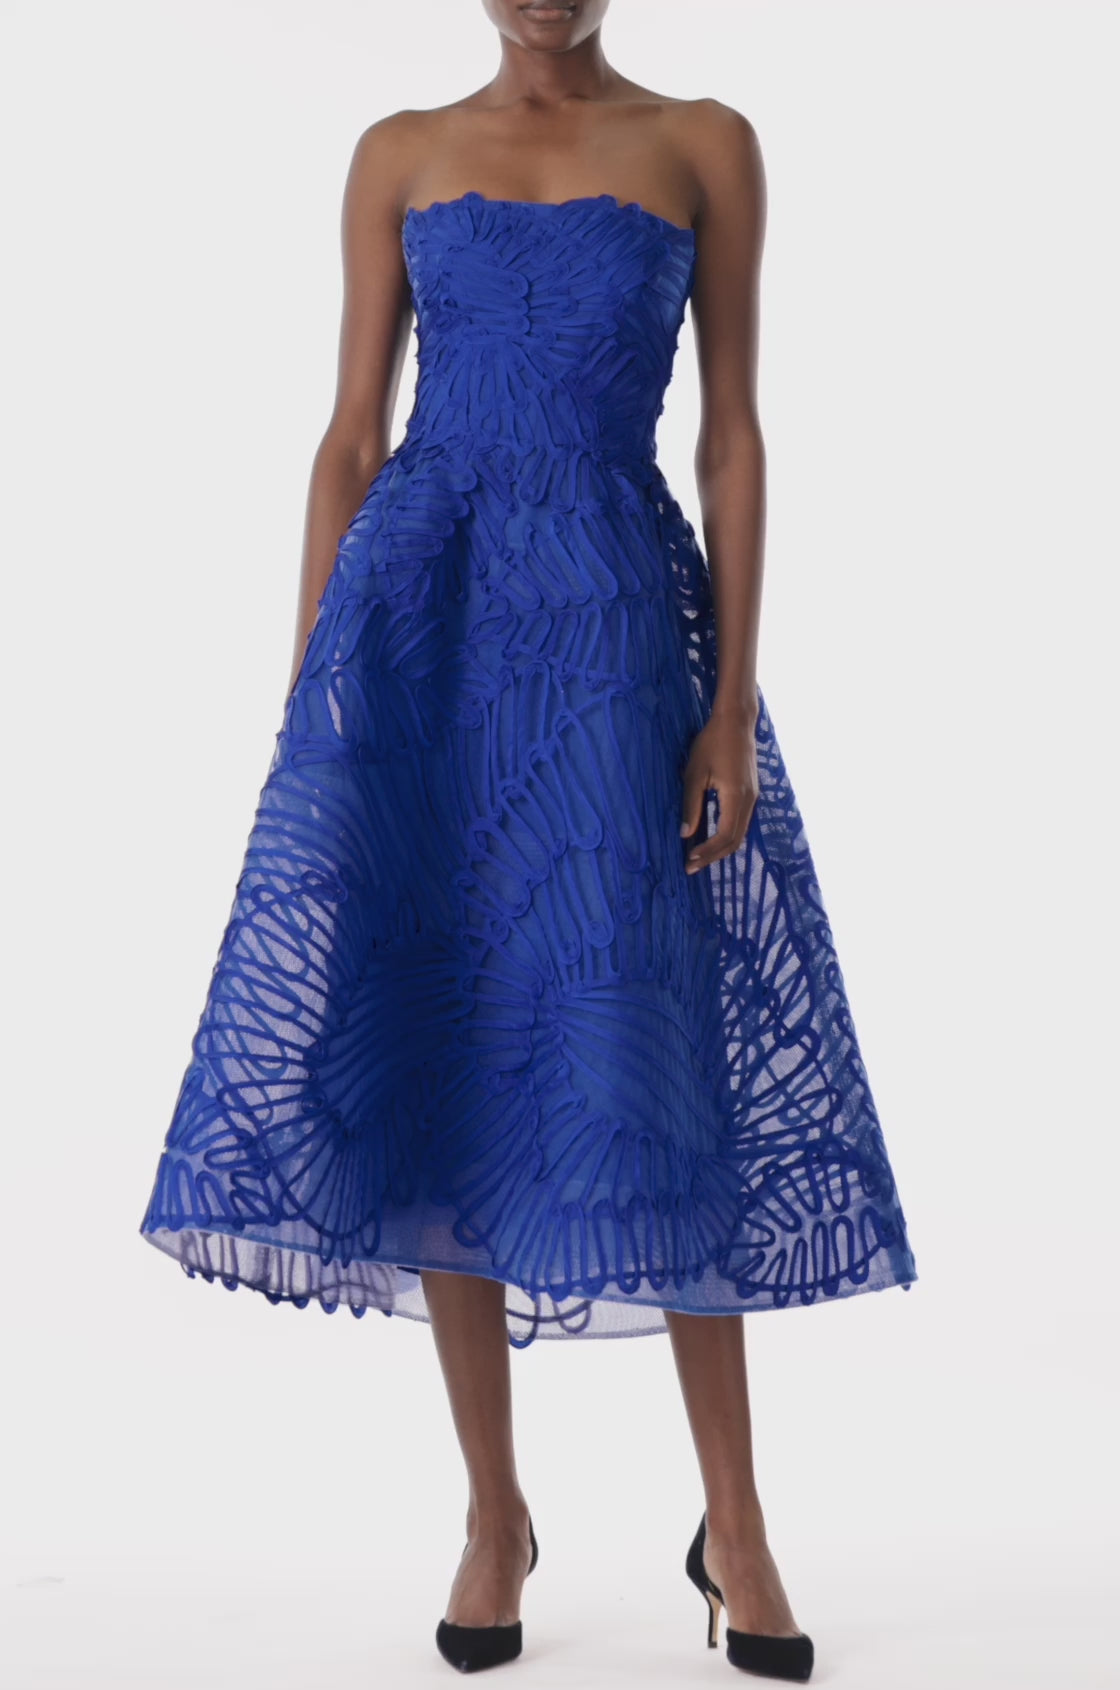 Monique Lhuillier embroidered royal blue strapless cocktail dress with tea-length full skirt.